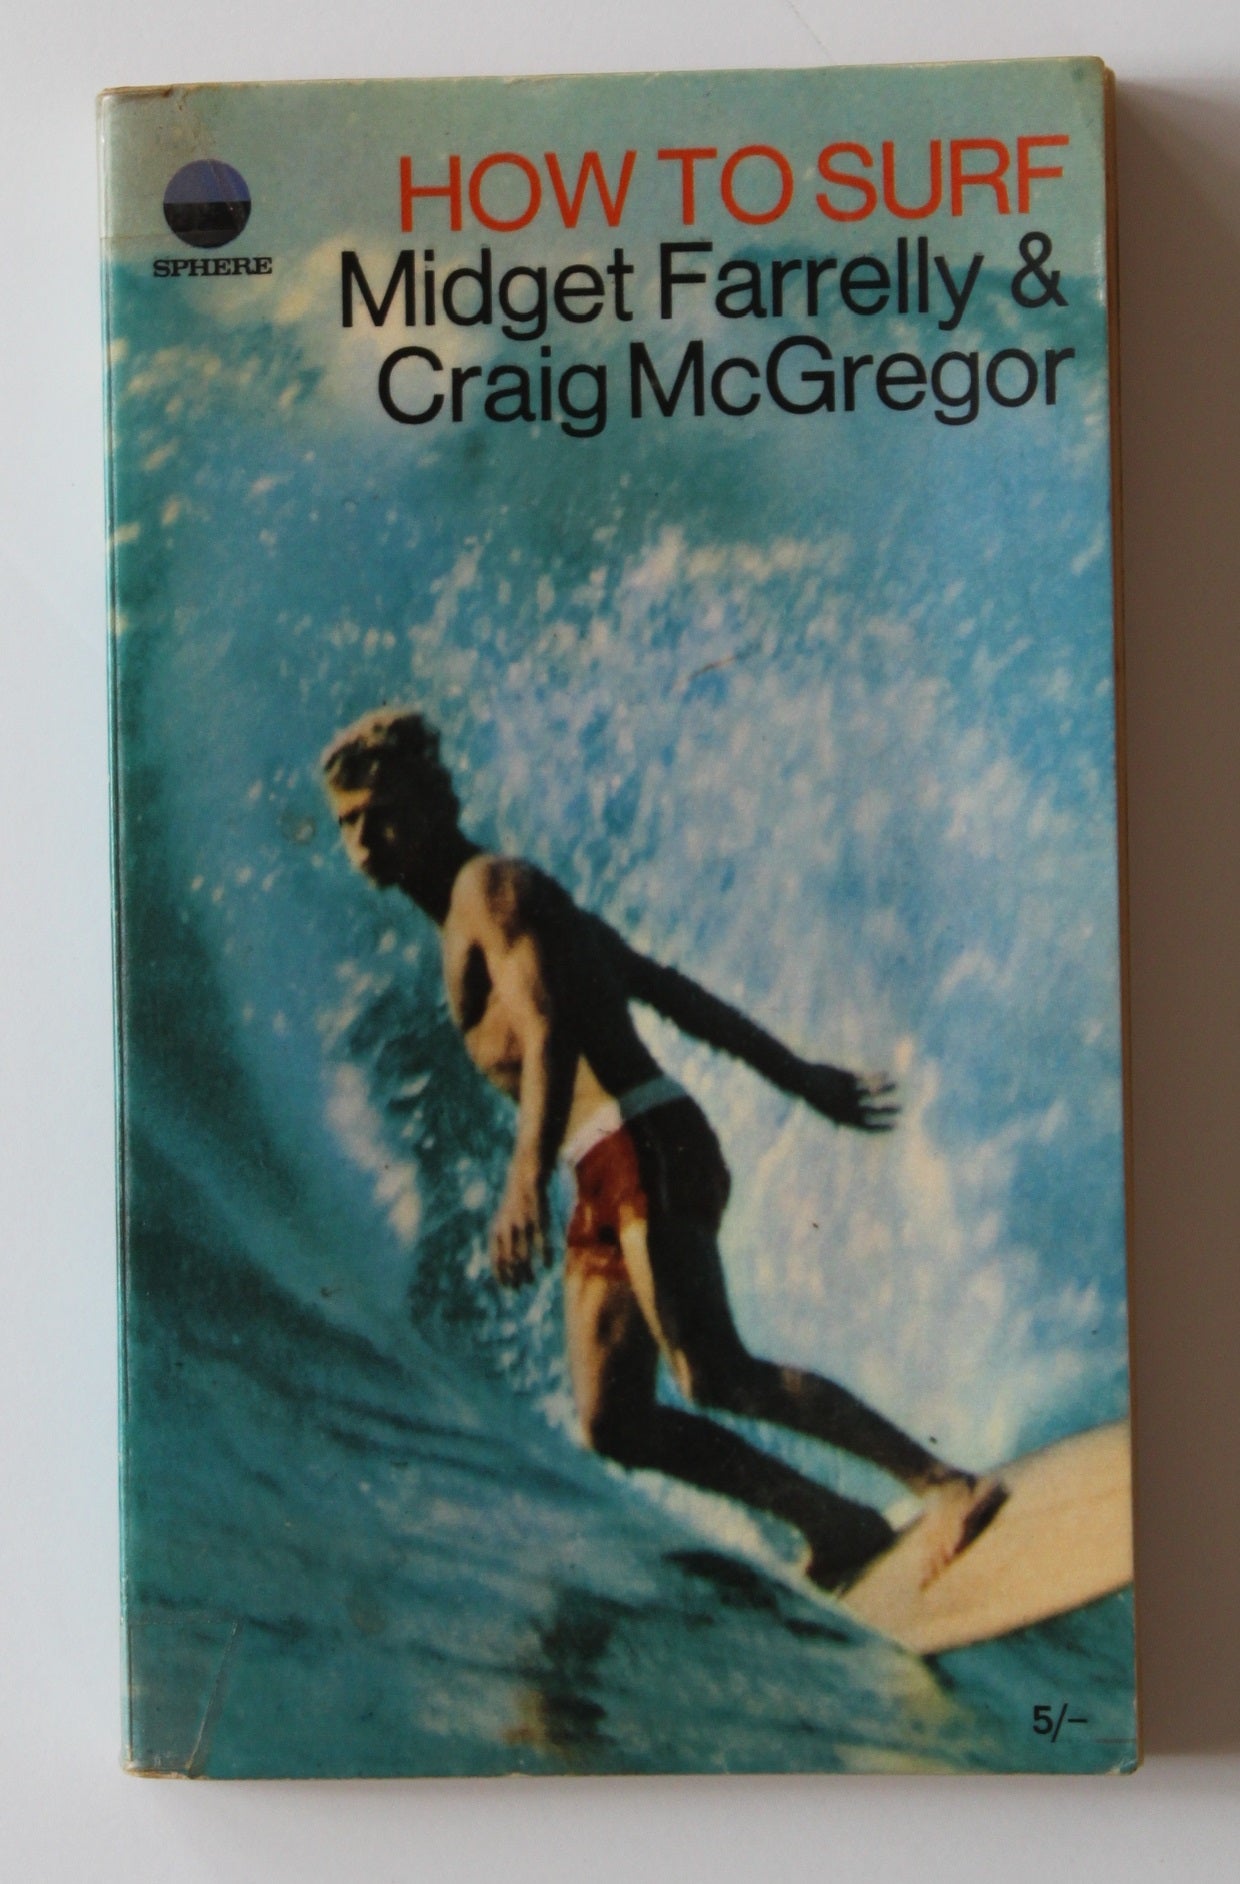 'How to Surf.' by Midget Farrelly.